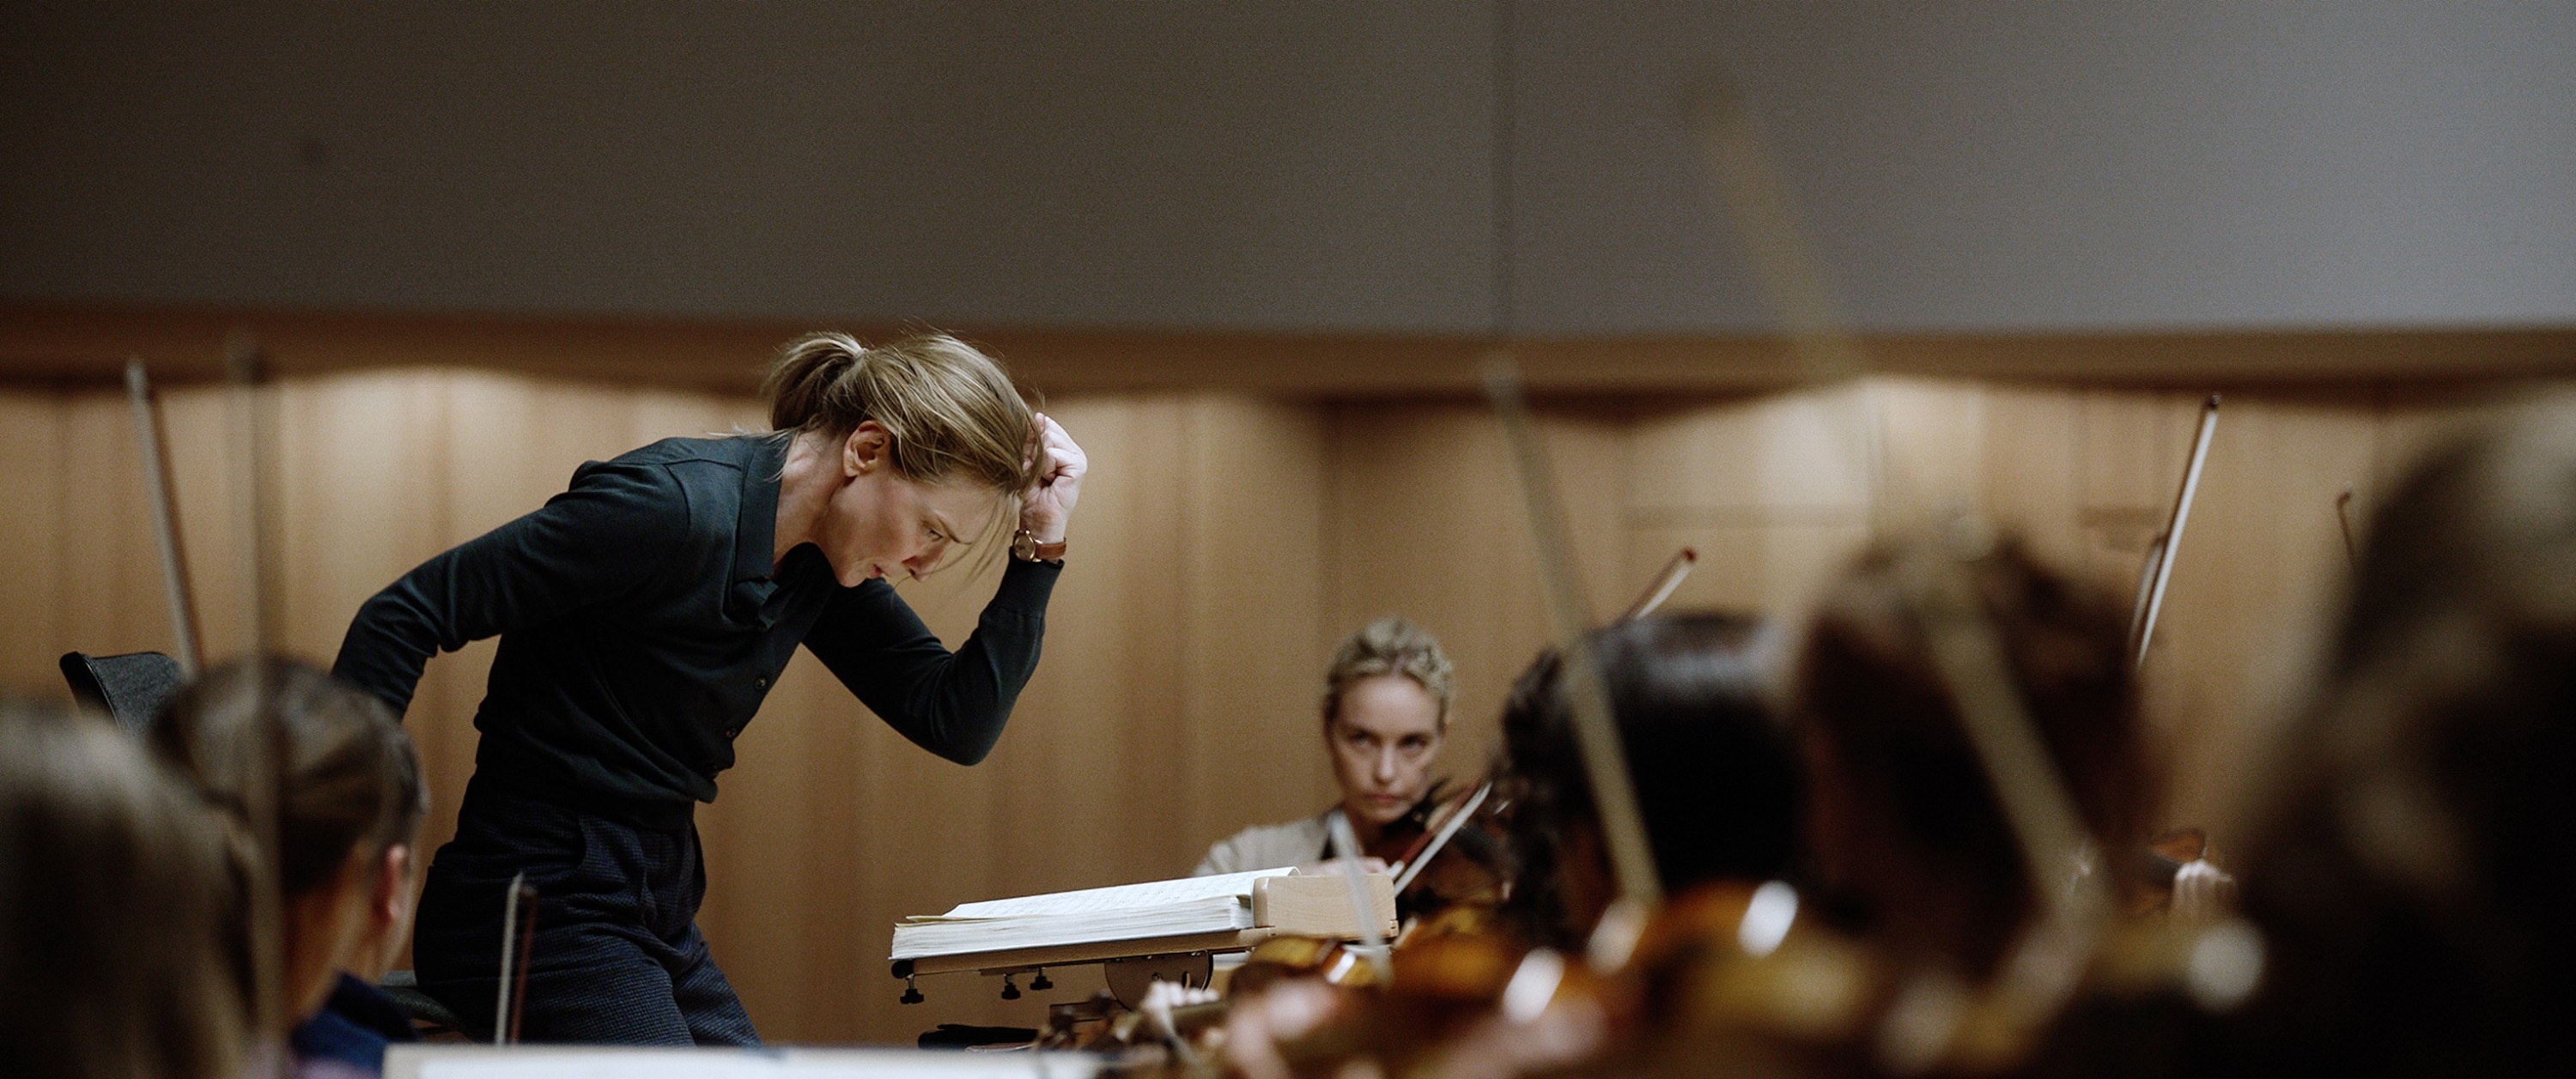 A woman conducting an orchestra